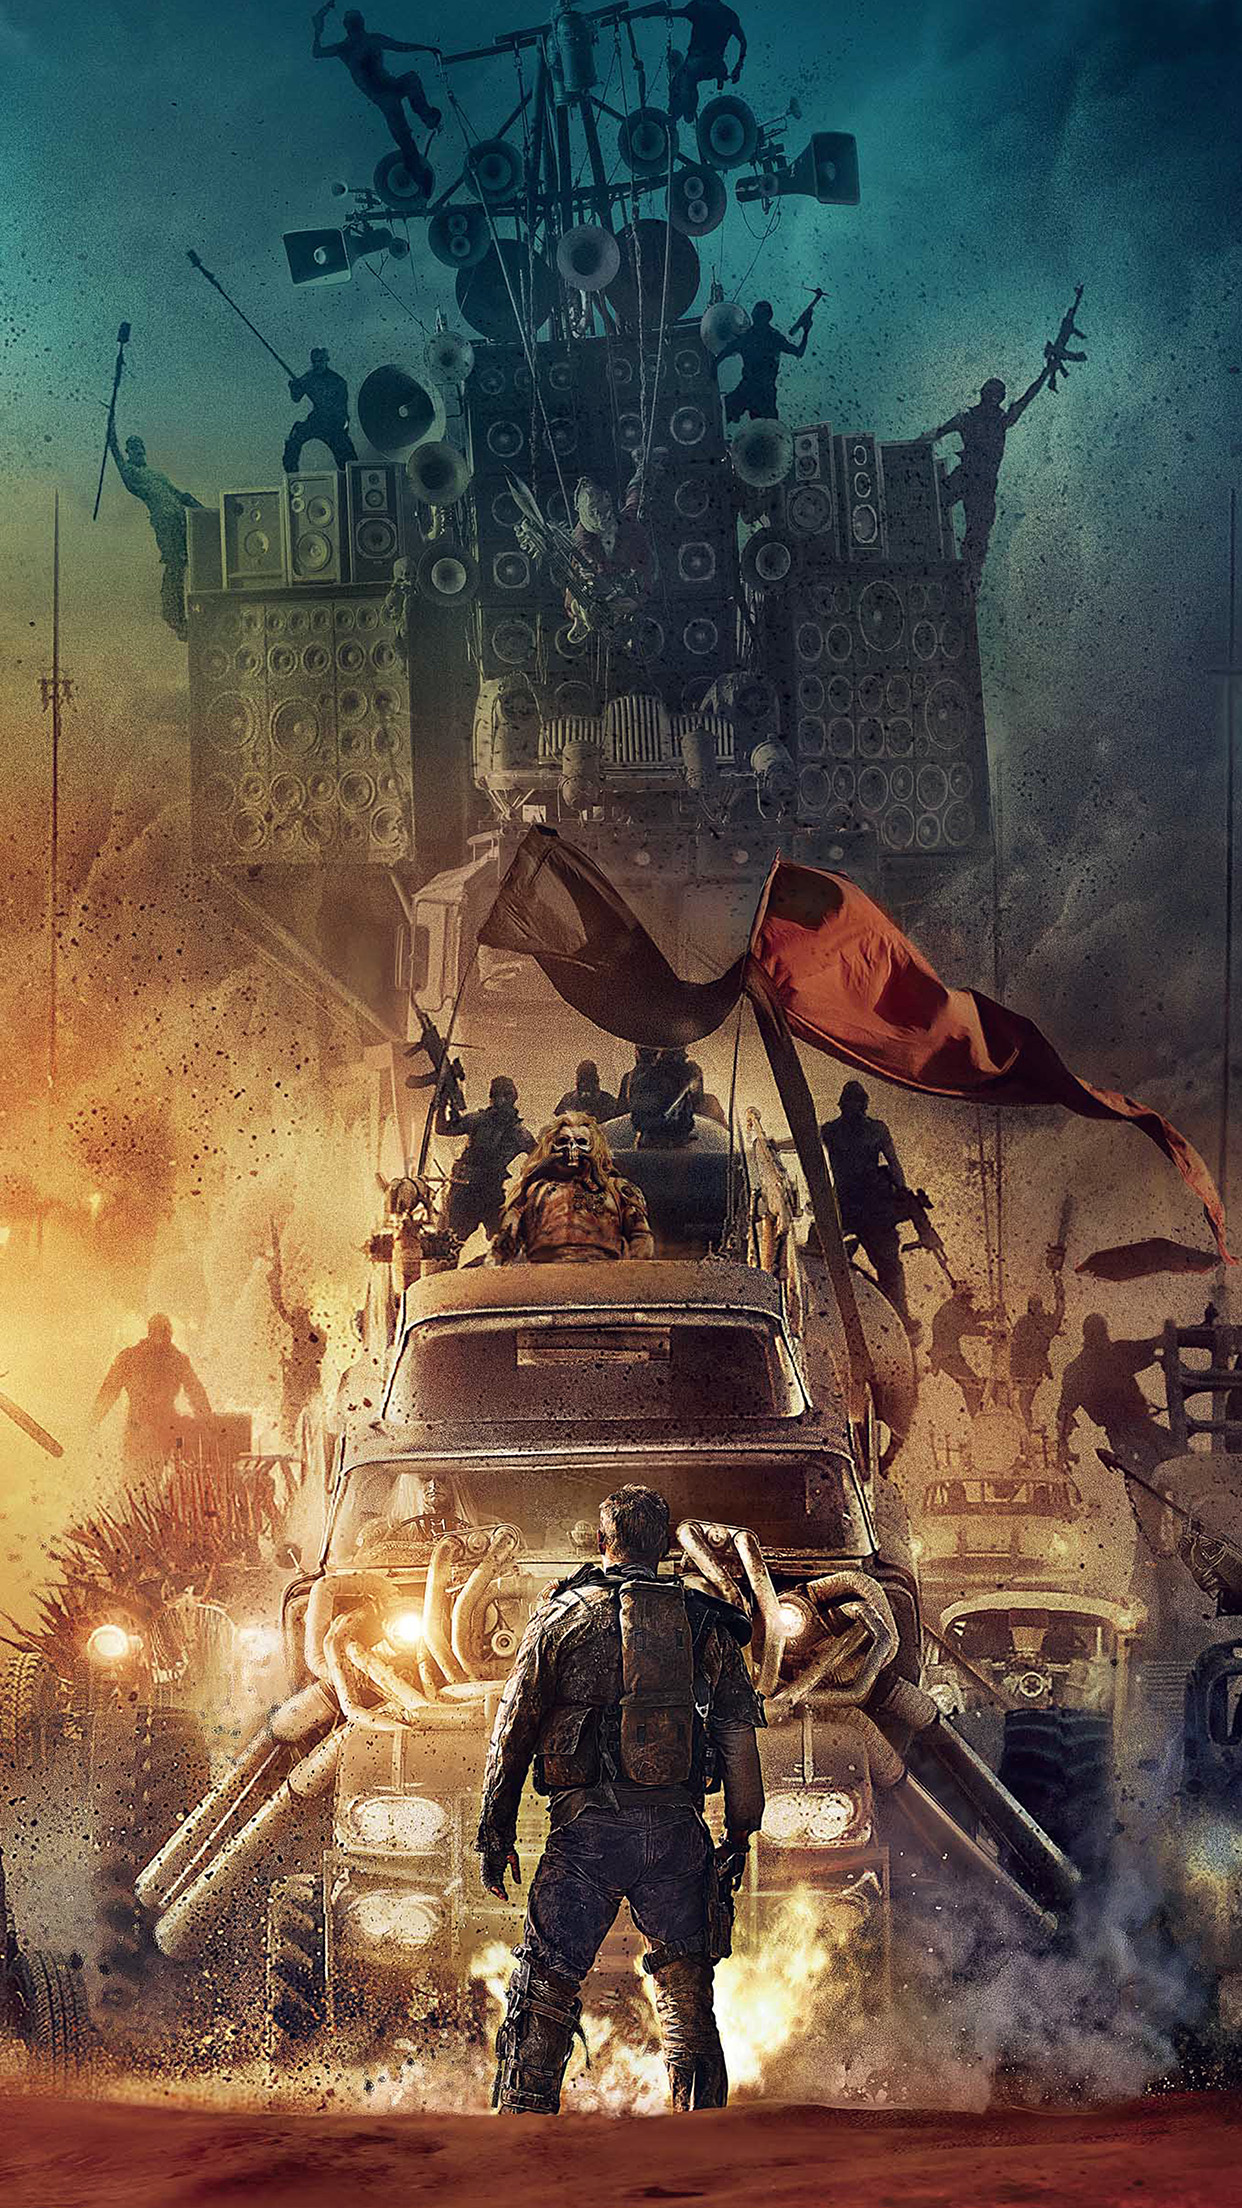 mad max iphone wallpaper,action adventure game,pc game,strategy video game,illustration,games